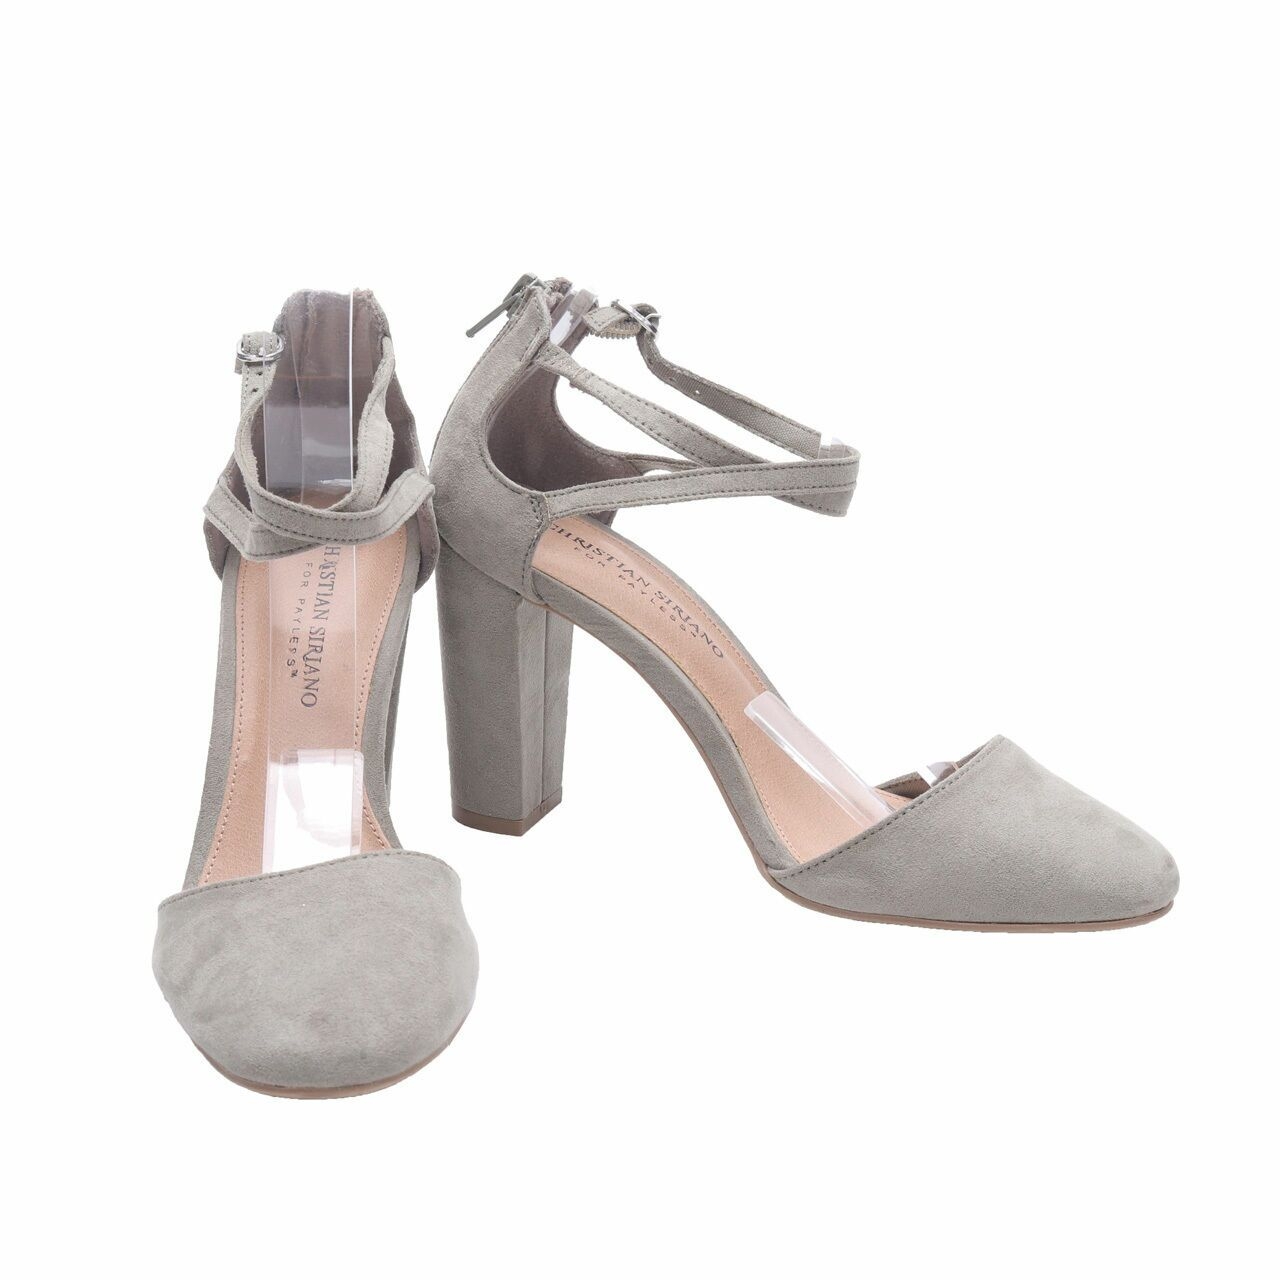 Christian Siriano for Pay less Mint Suede Heels